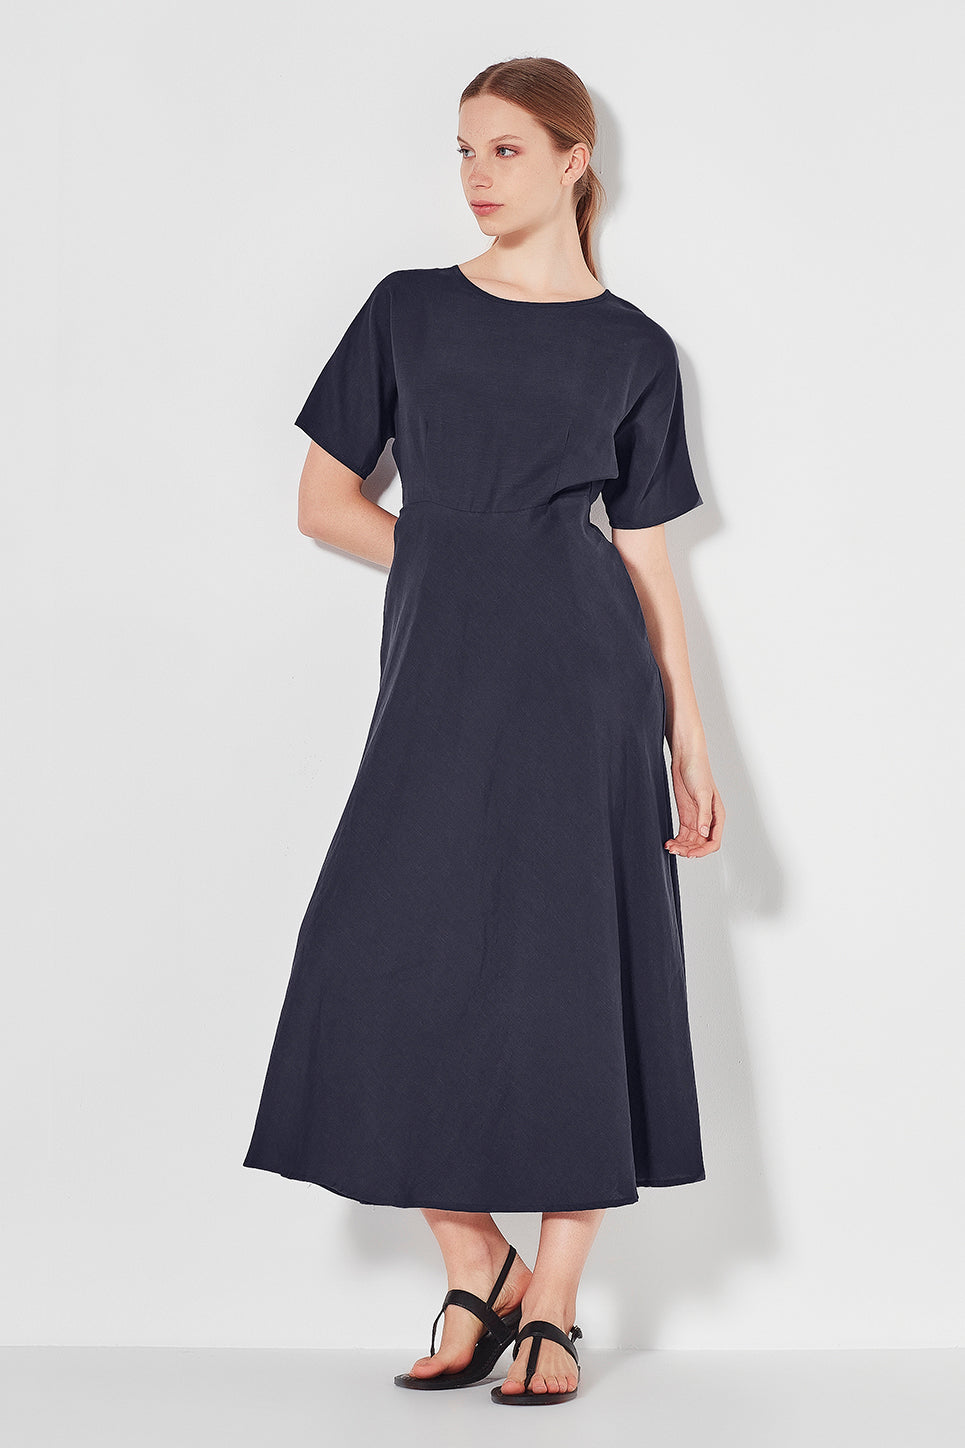 The Evelyn 2-Way Dress in Navy